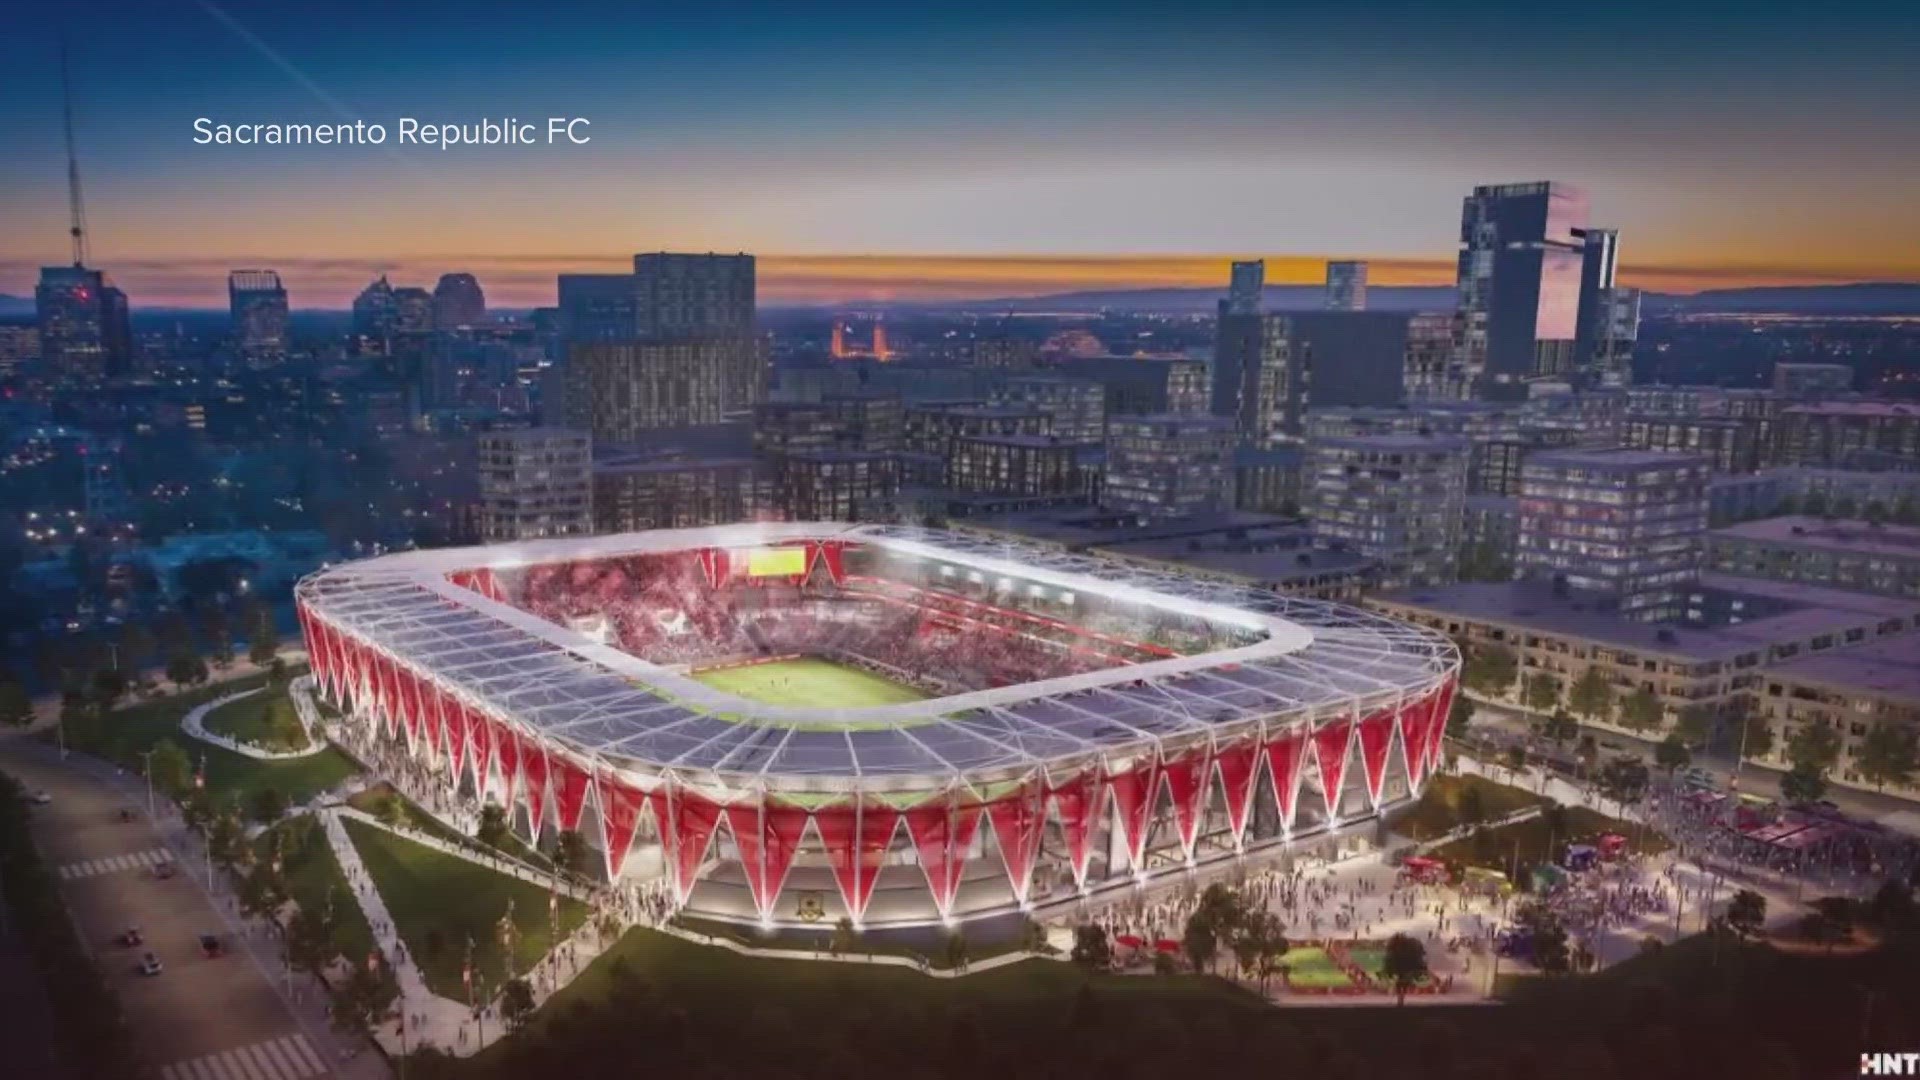 An investment company in North America is in talks with Sacramento city officials to potentially invest in the Sacramento Republic FC for a bid into MLS.